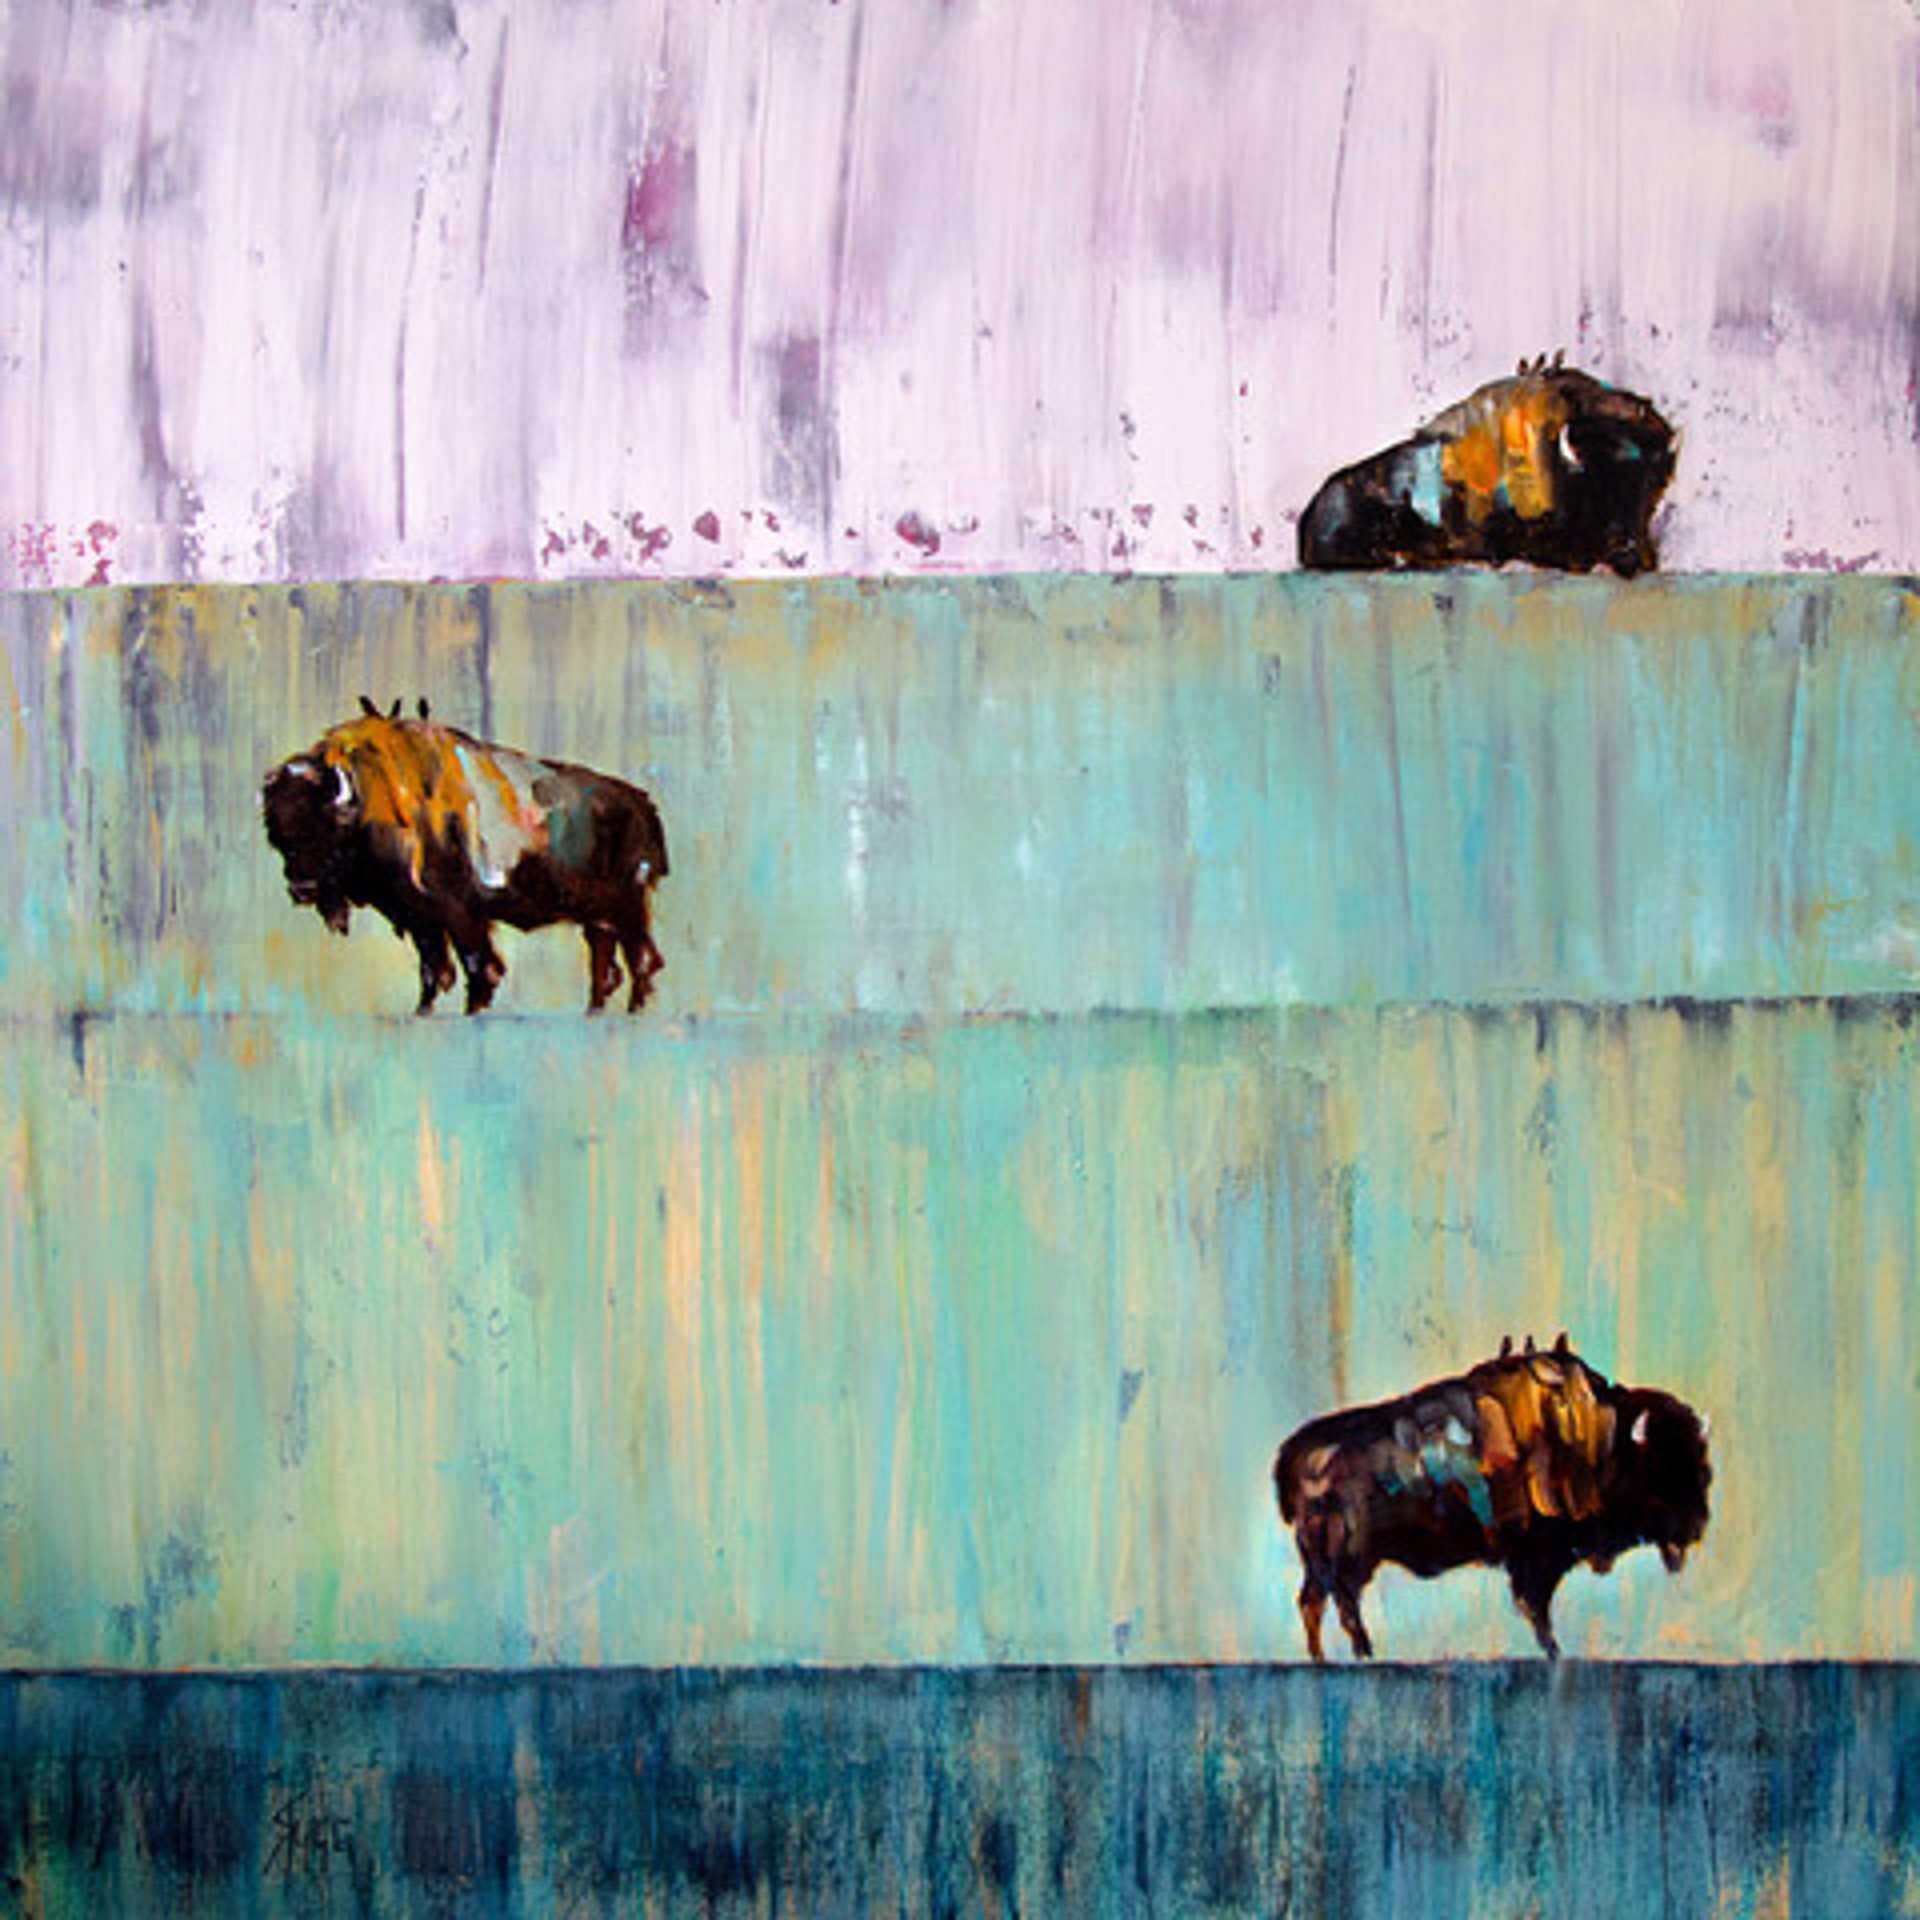 Bison at Sunset by Janice SUGG